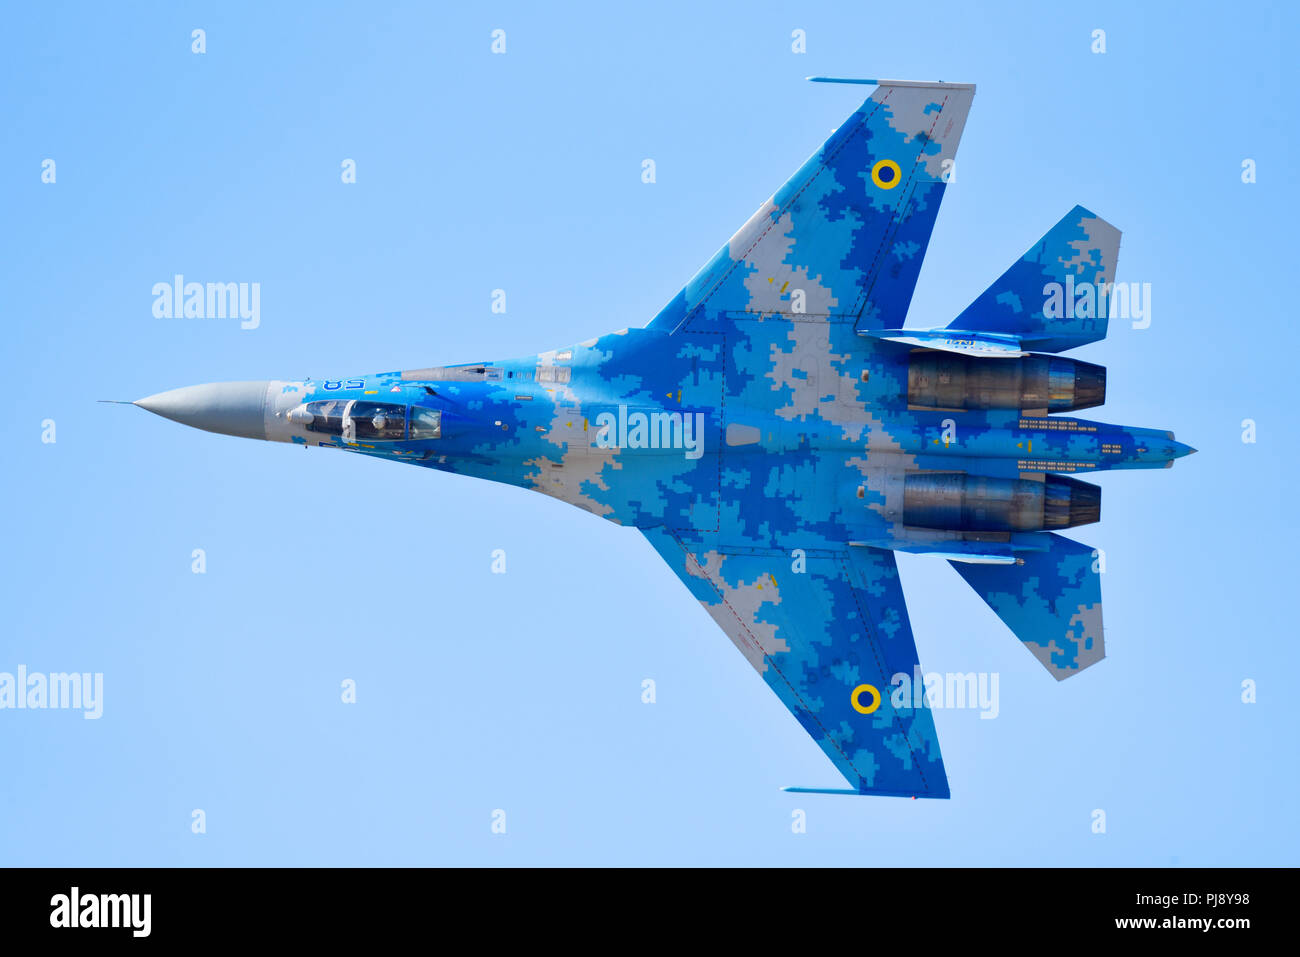 Ukrainian Air Force Sukhoi Su-27 Flanker fighter jet plane flying at the Royal International Air Tattoo, RIAT, RAF Fairford airshow. Top plan view Stock Photo